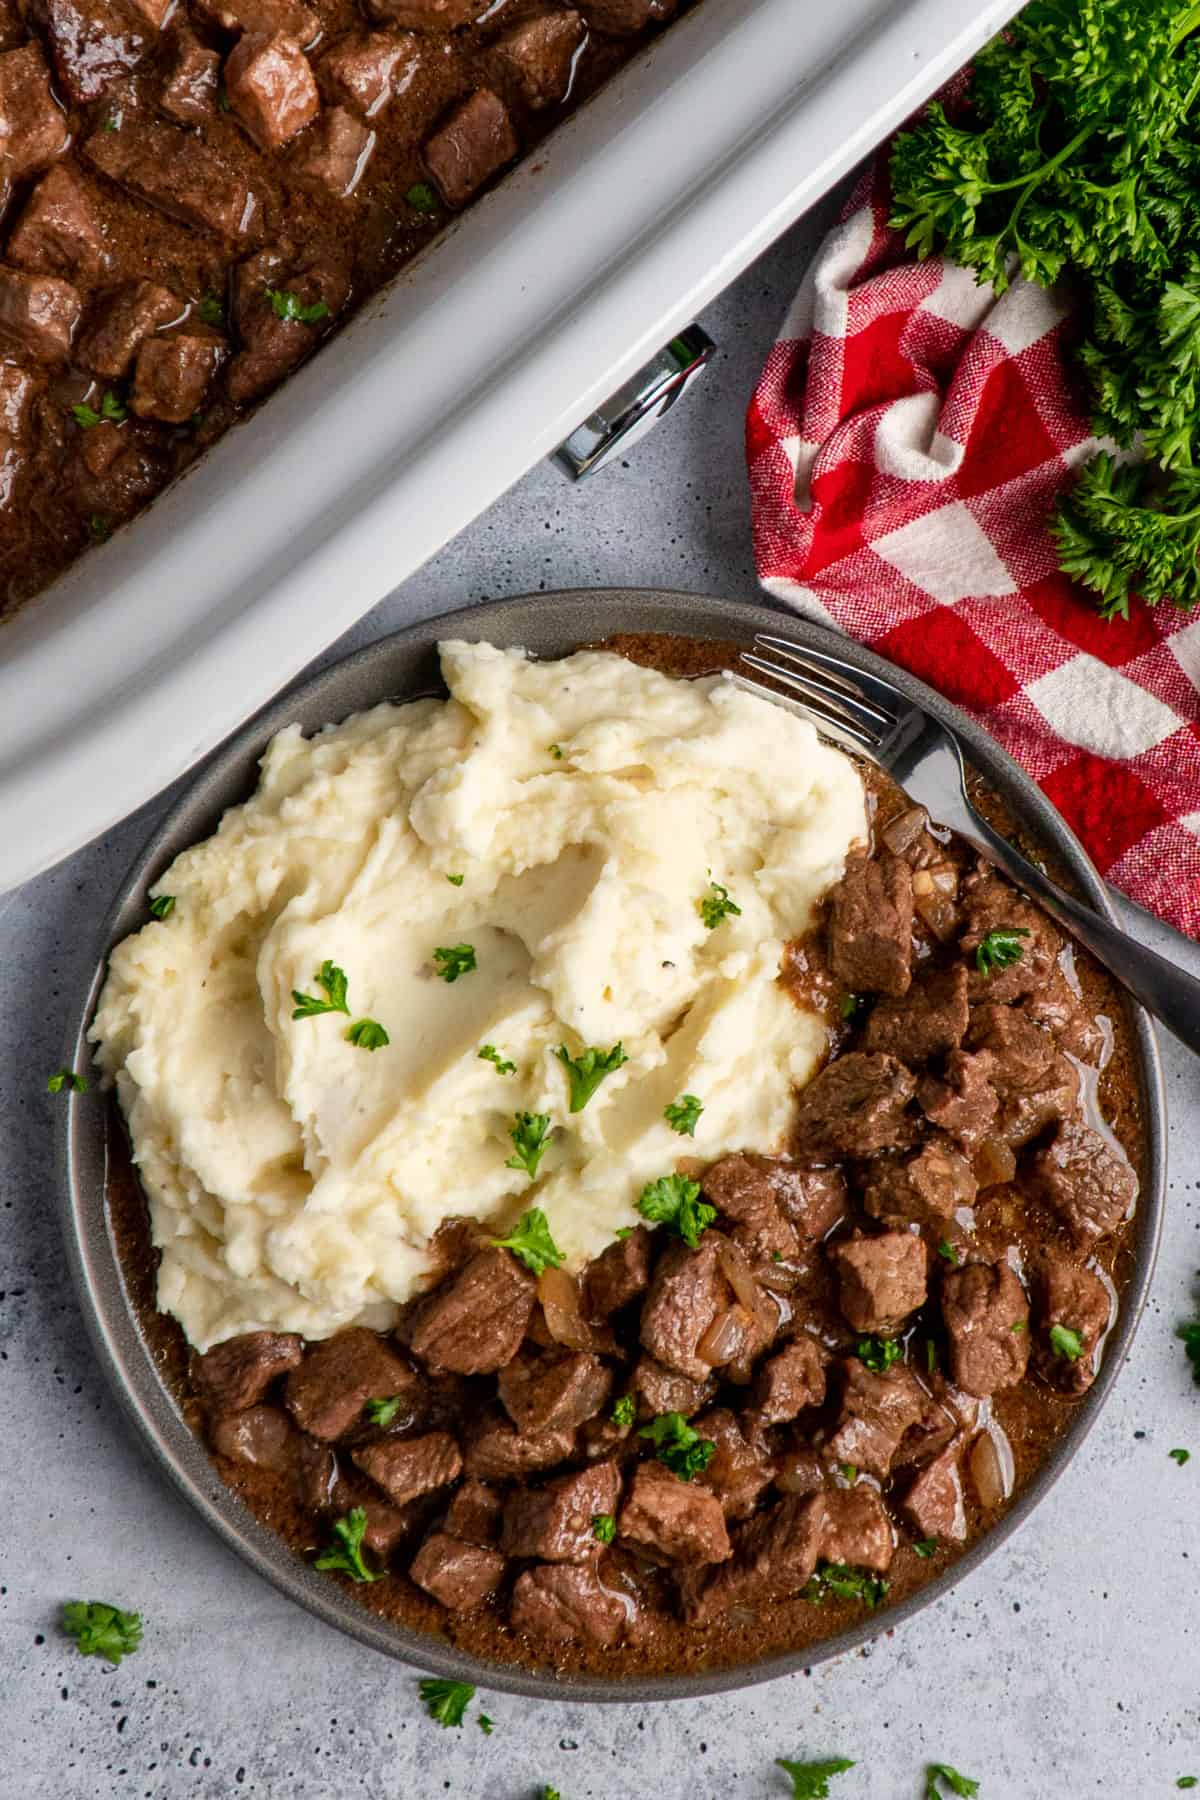 Overhead look at steak bites with garlic mashed potatoes.